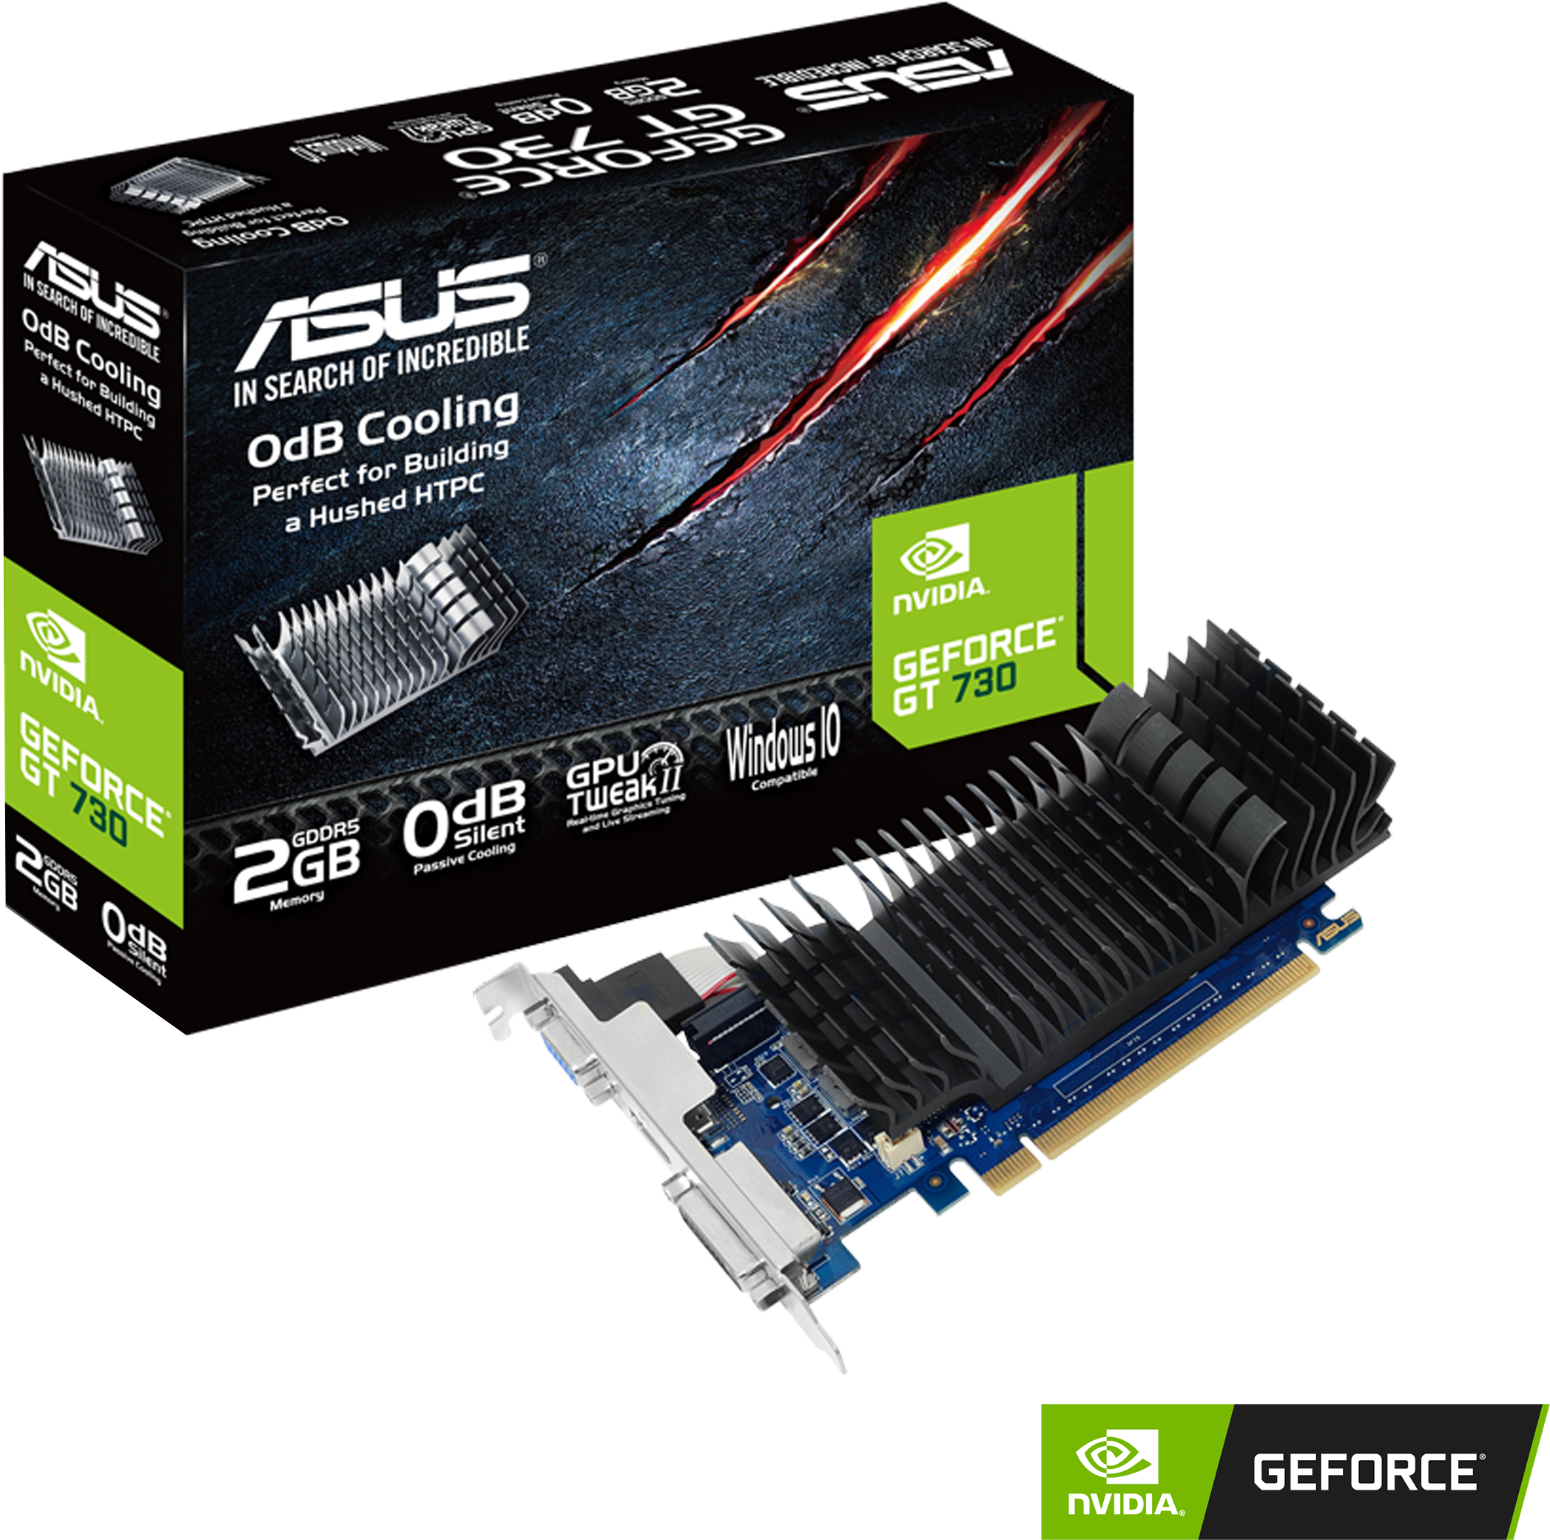 8233-22757-ASUS-VC-GT730-SL-2GD5-BRK-4.png